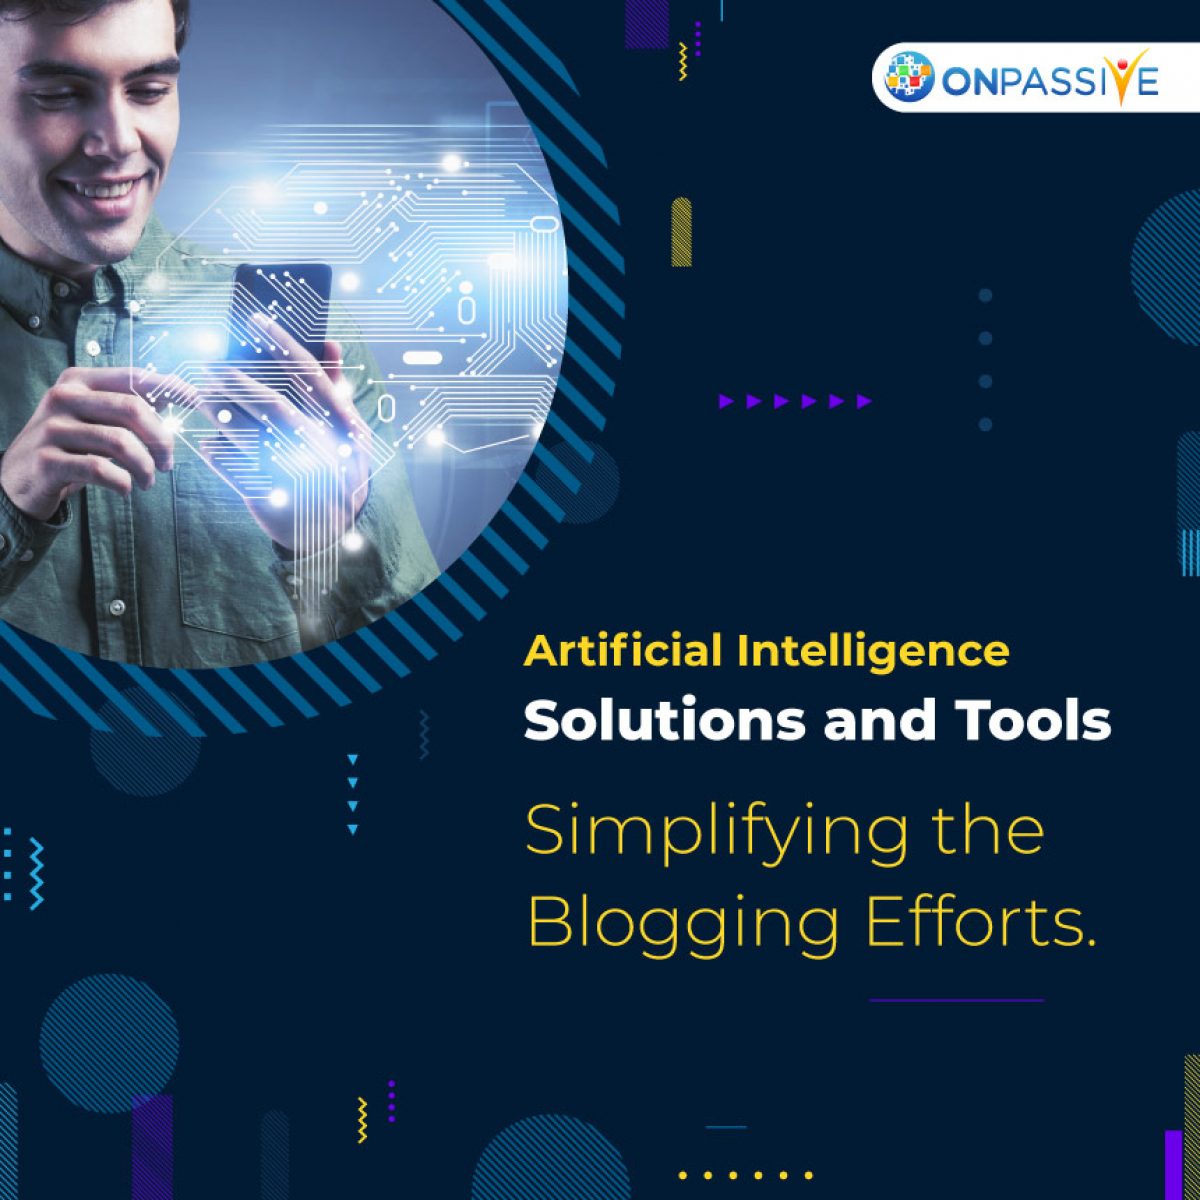 5 Steps to Use Artificial Intelligence Blog Writing to Make Blogging Easier